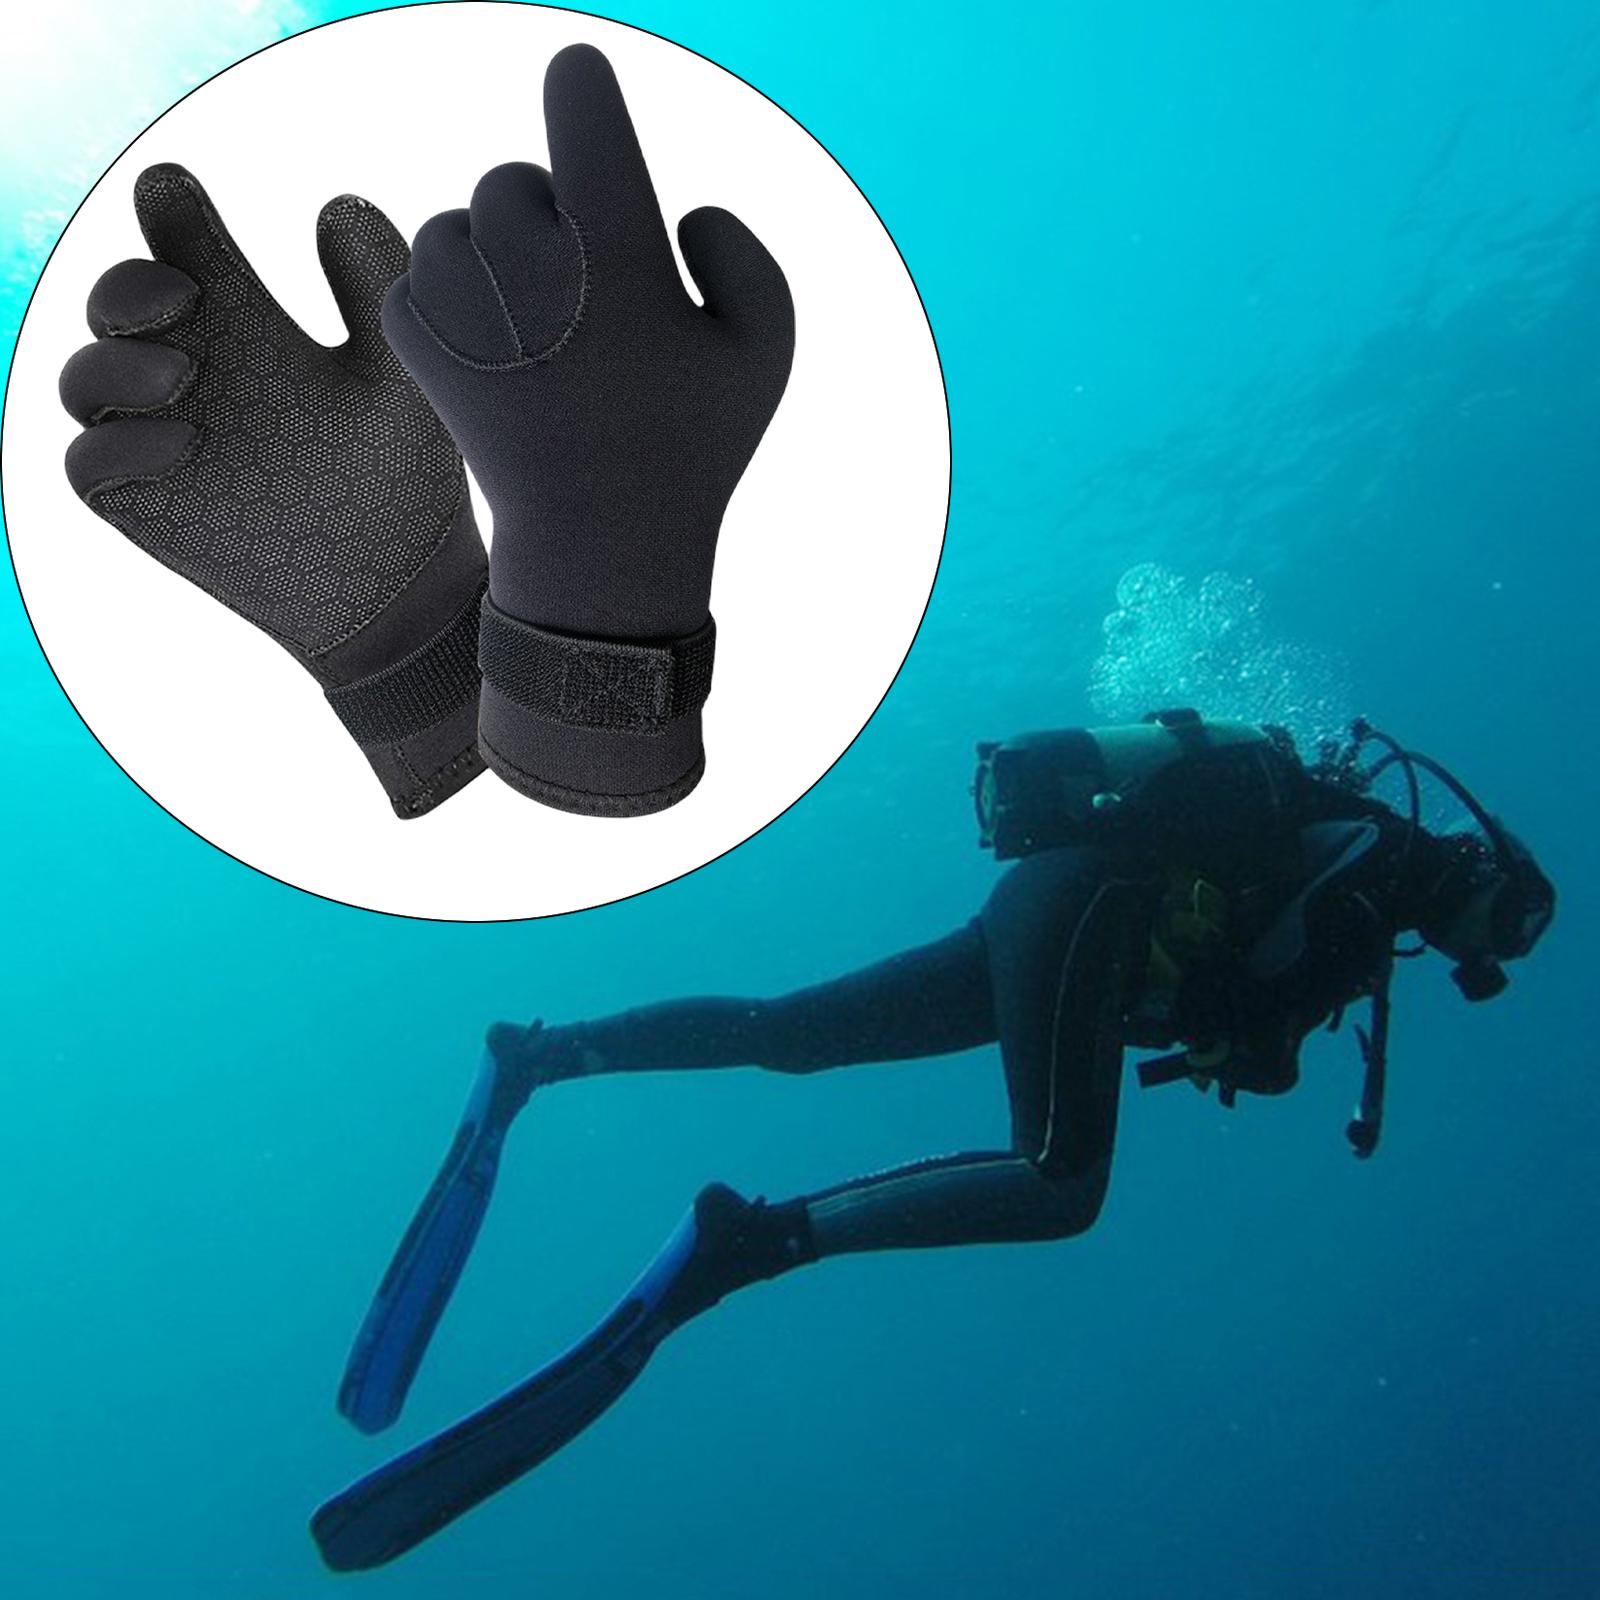 Scuba Diving Gloves Neoprene Wetsuit Gloves for Water Sports Surfing Rafting 3mm L